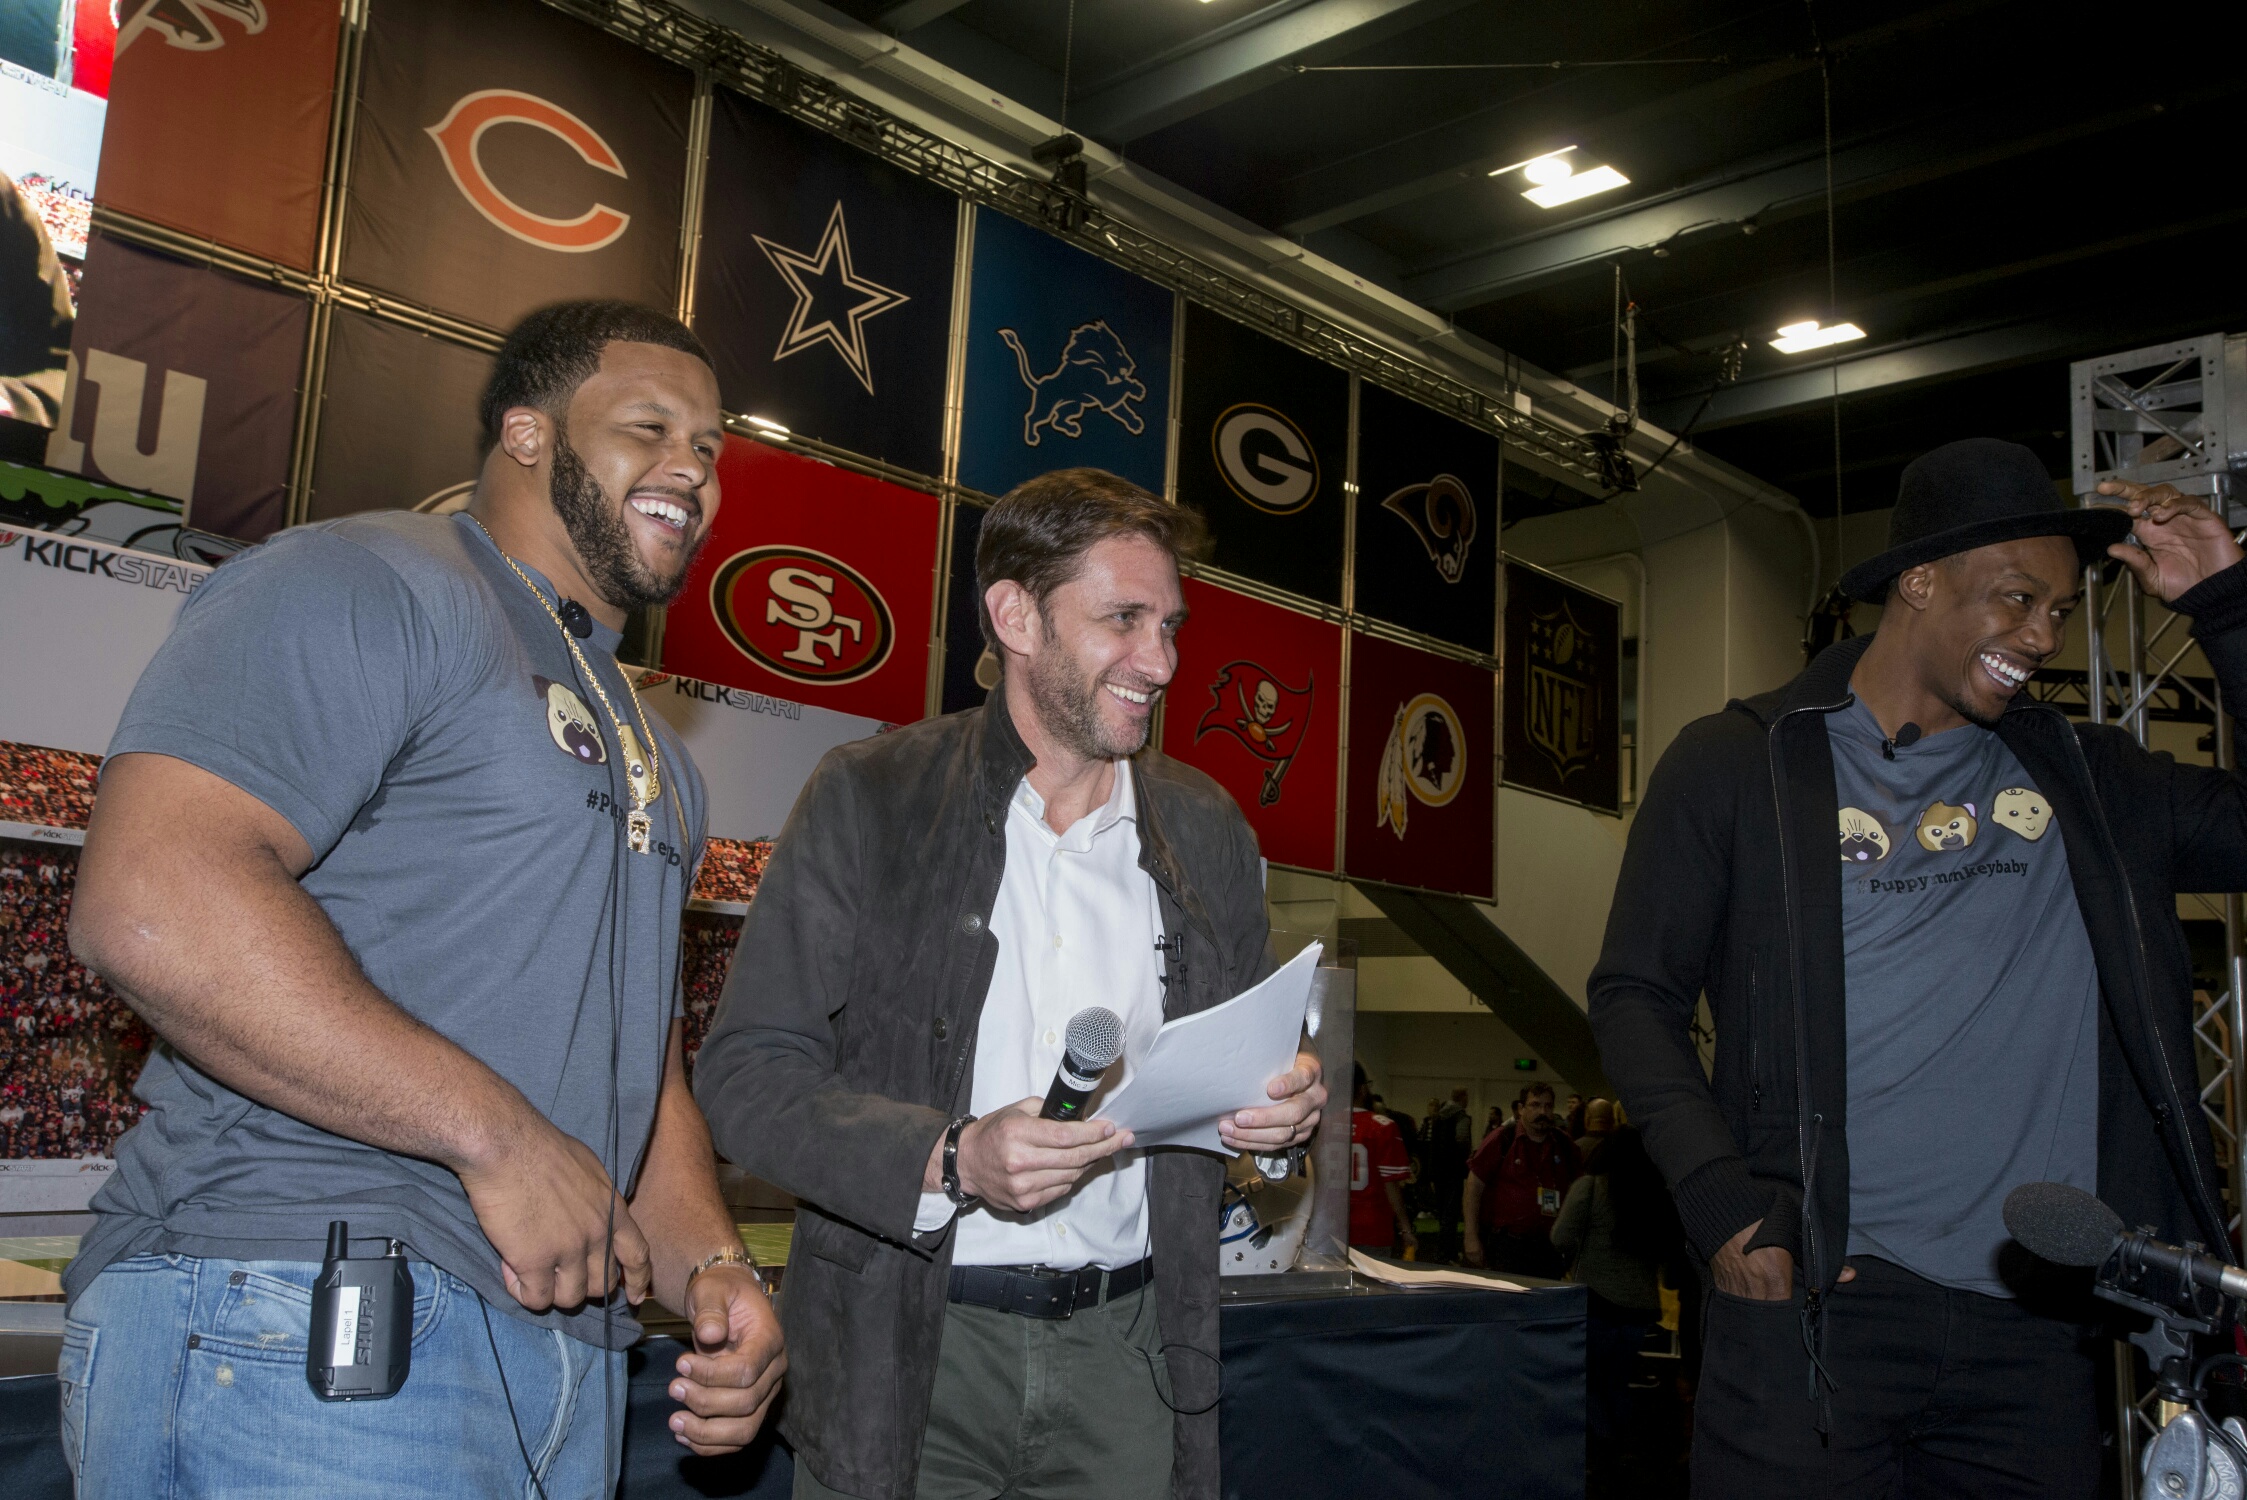 Pro wide receiver Brandon Marshall, pro defensive tackle Aaron Donald and radio personality Mike Greenberg, host the MTN DEW® KICKSTART™ Super Bowl 50 predictions by a puppy, a monkey and a baby at the NFL Experience.